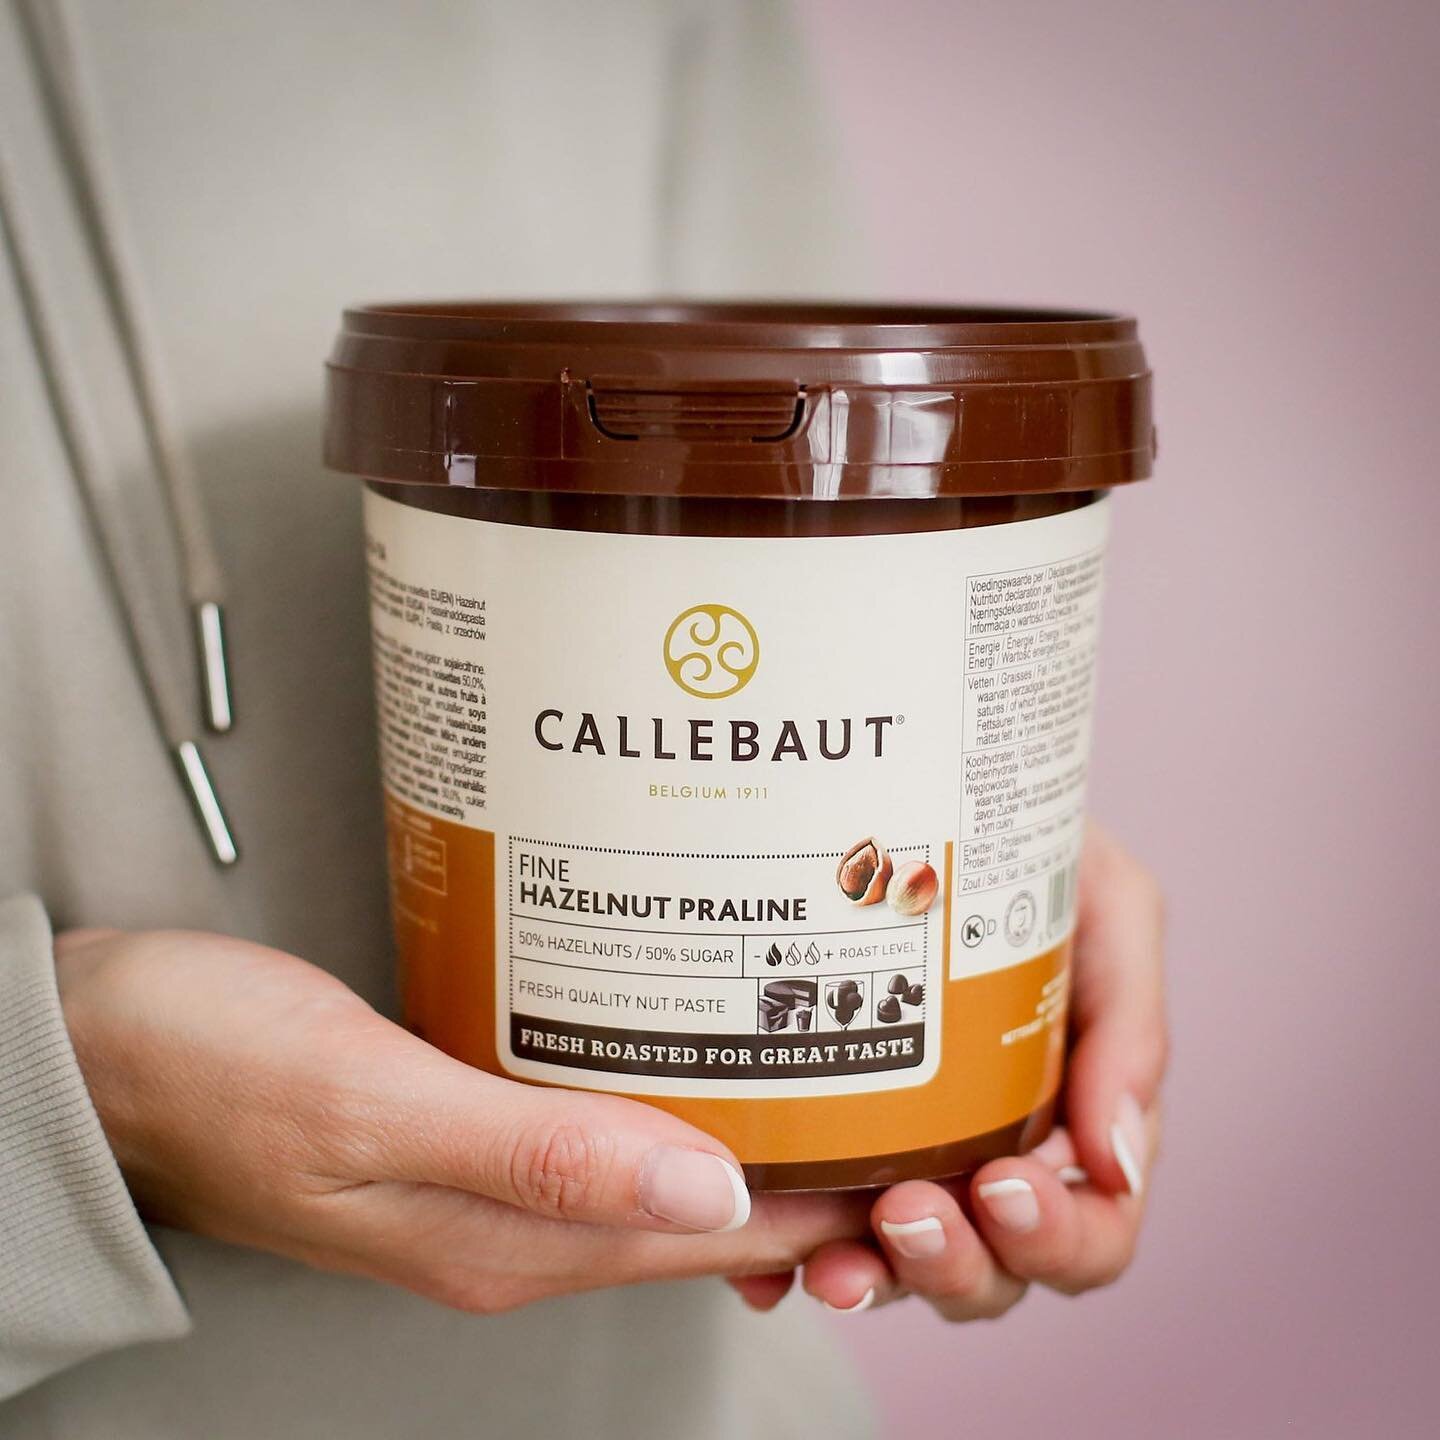 Hope you&rsquo;re having a lovely long weekend (thanks King Charles 👑) ~ just wanted to stop by with a little reminder that we&rsquo;ve got some amazing offers on Callebaut running at the moment! Praline has been one of our best sellers this weekend